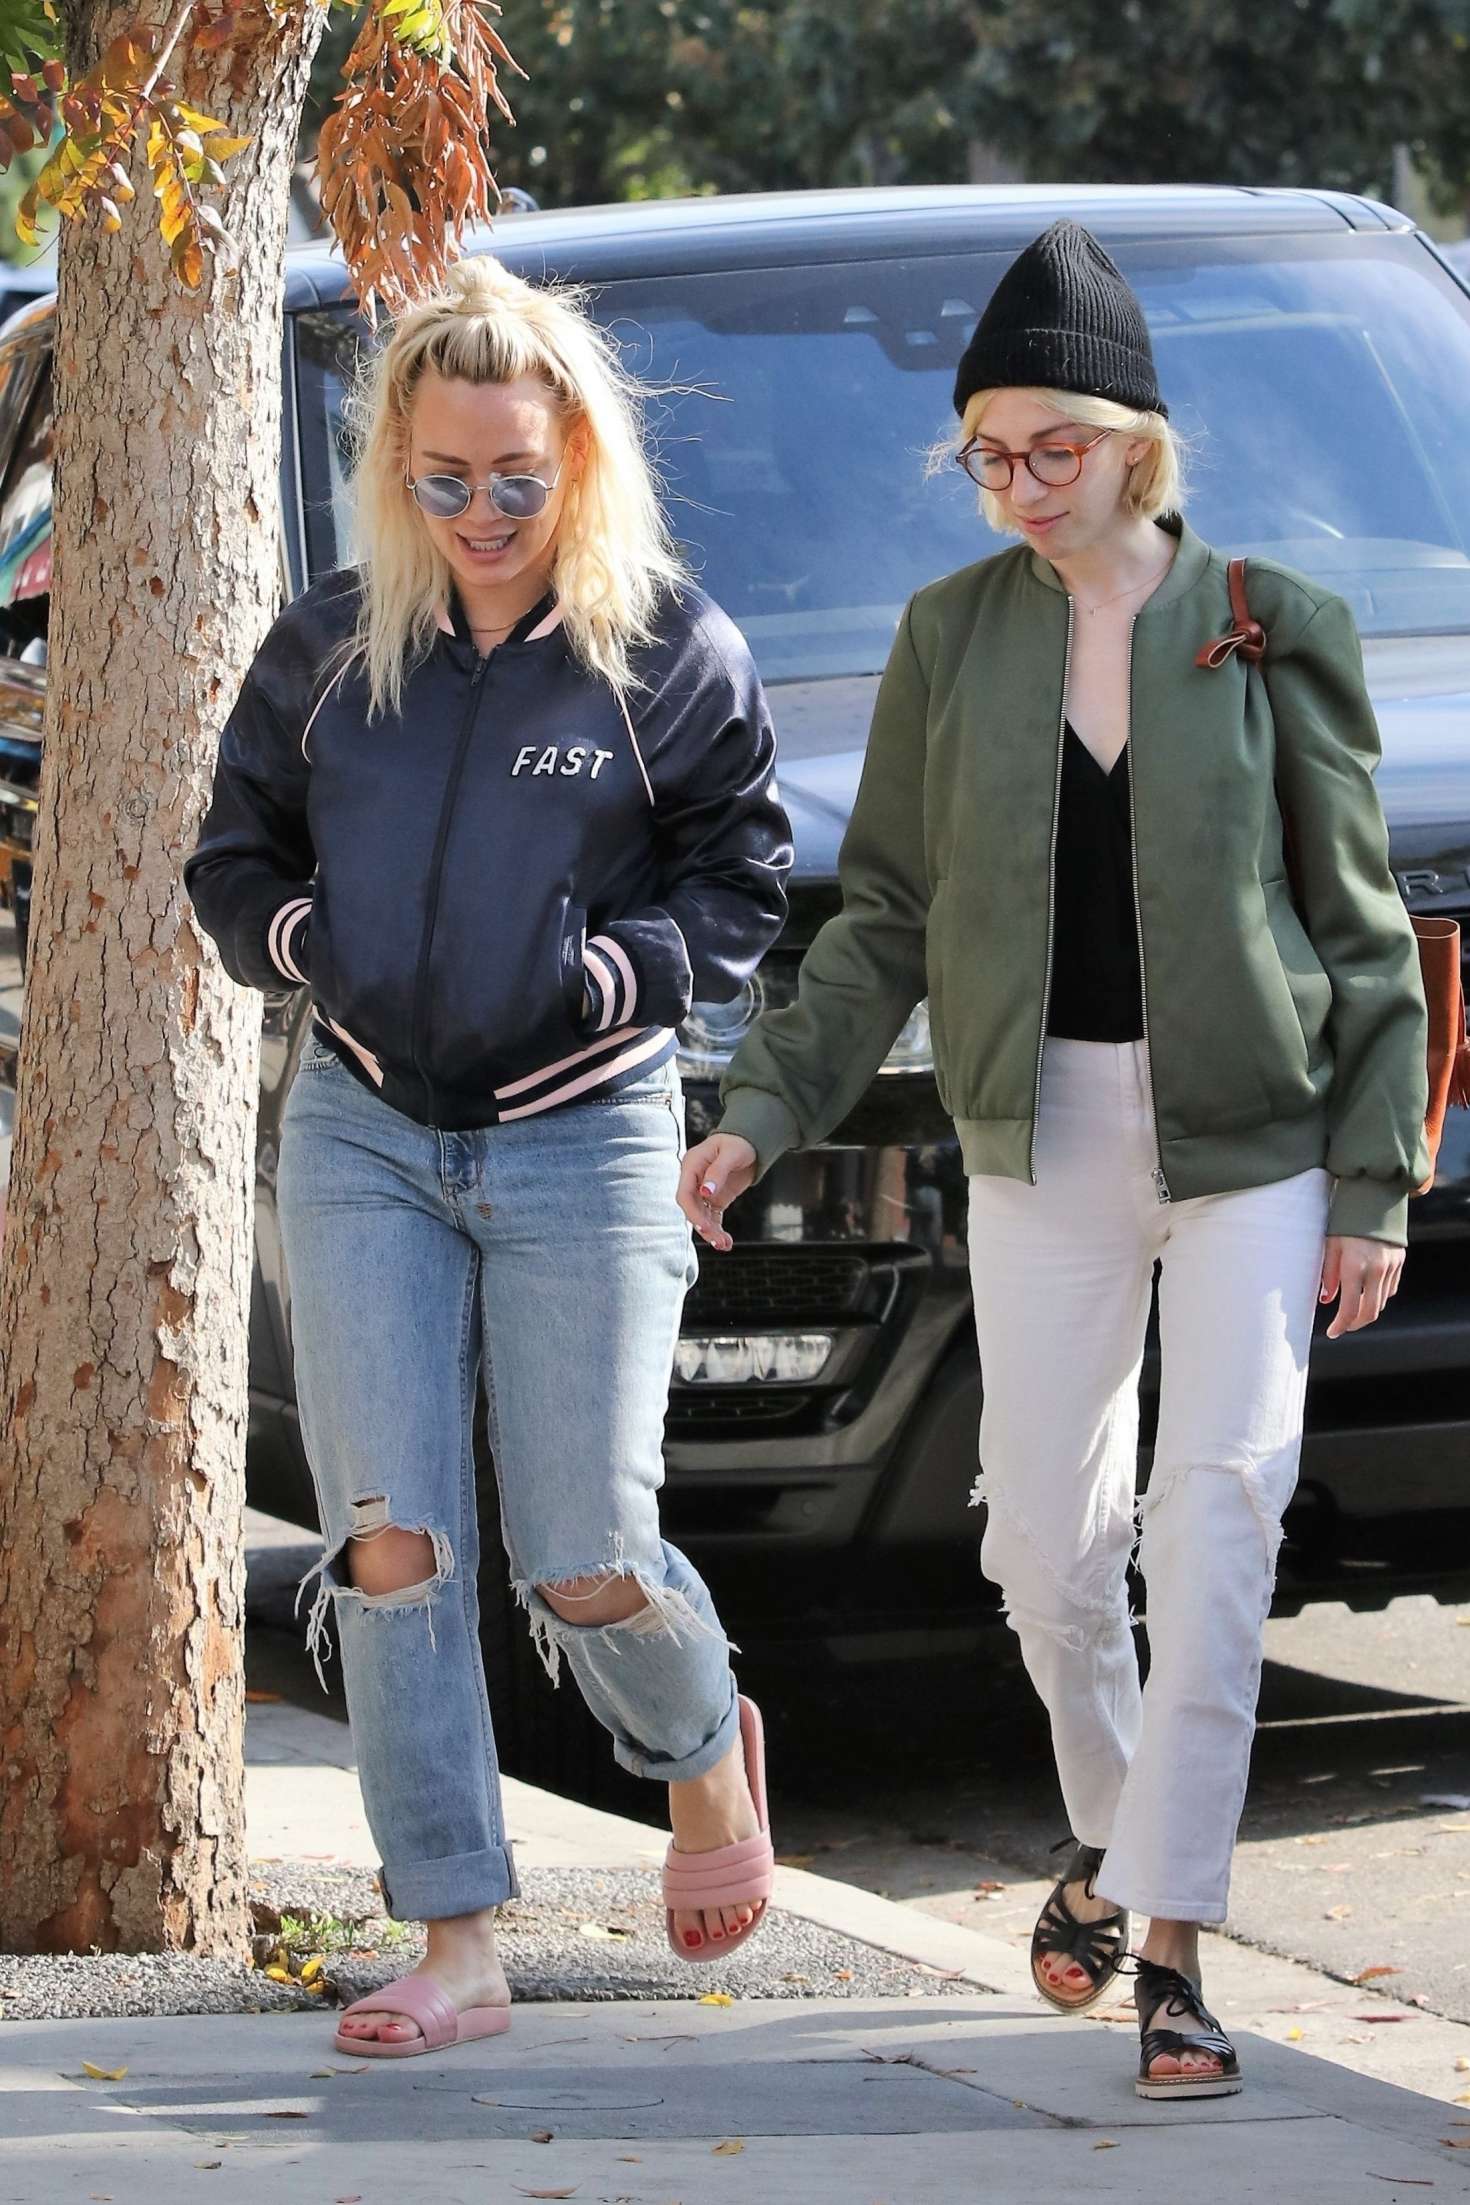 Hilary Duff in Ripped Jeans with a friend in Studio City